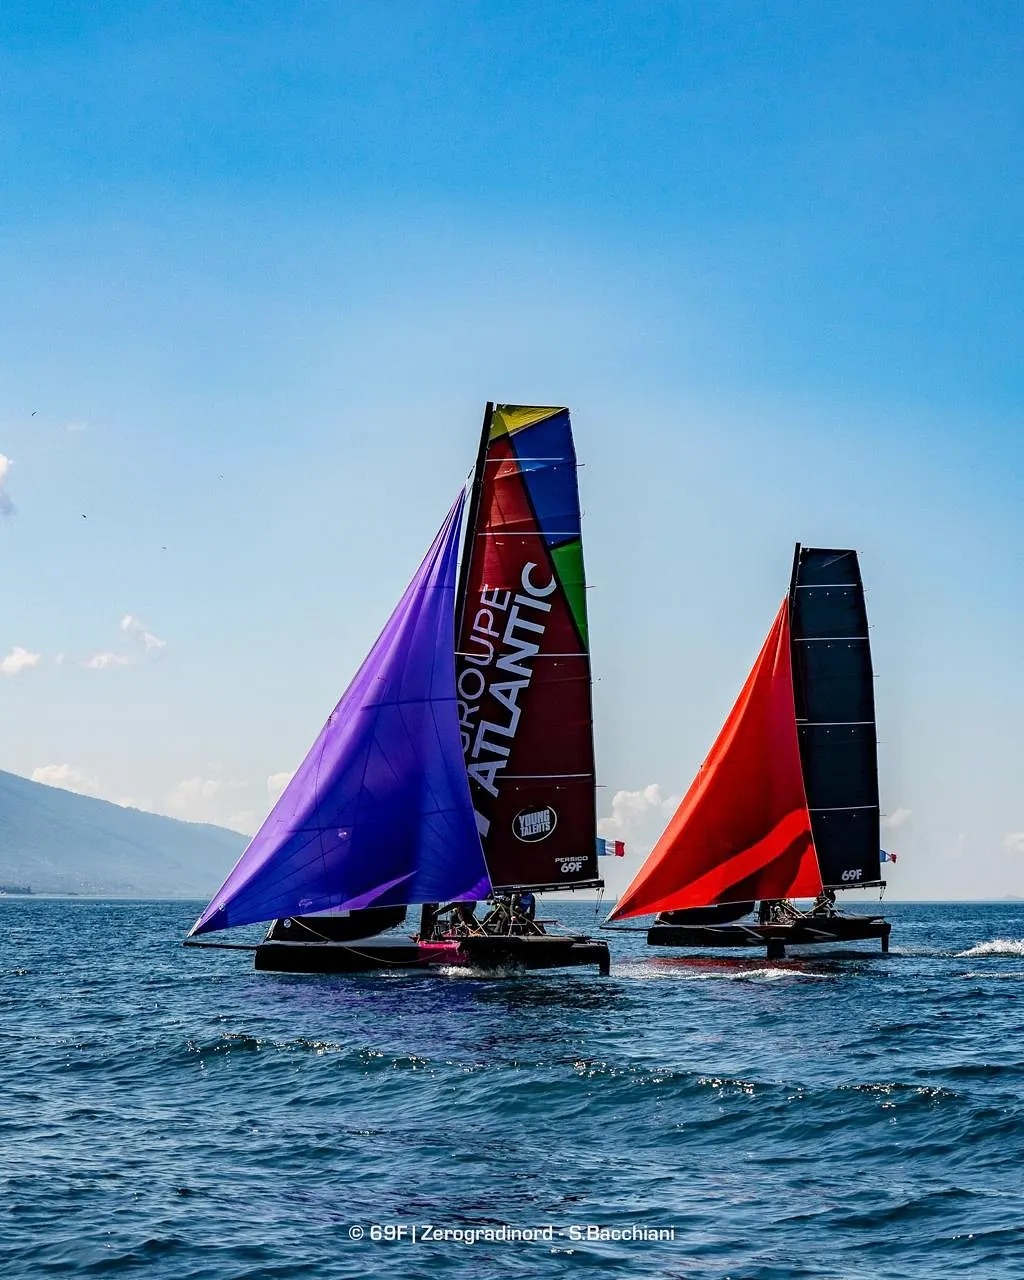  Persico 69F - Youth Gold Cup - Torbole ITA - Day 5